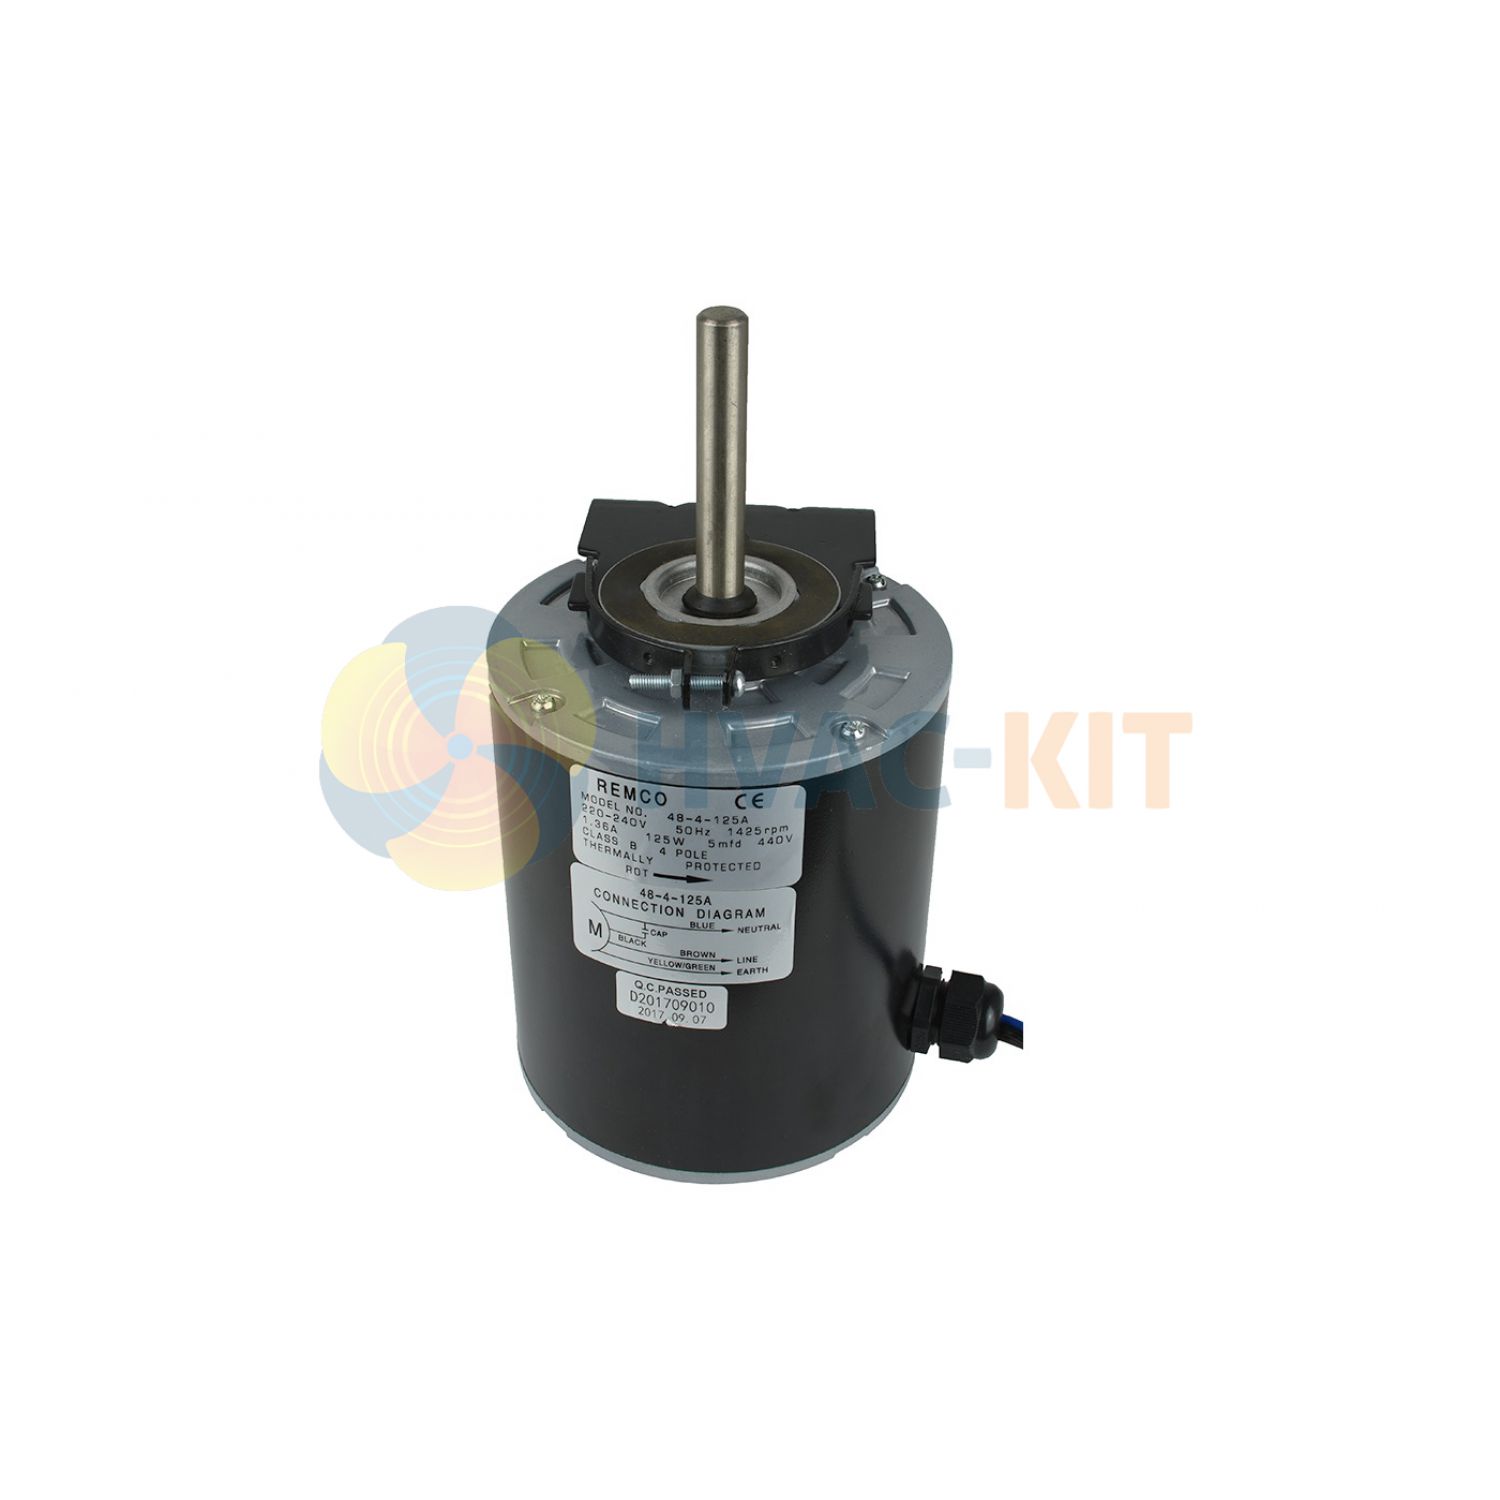 48-4-125A-RB_4 Resilient Base Mount Motor